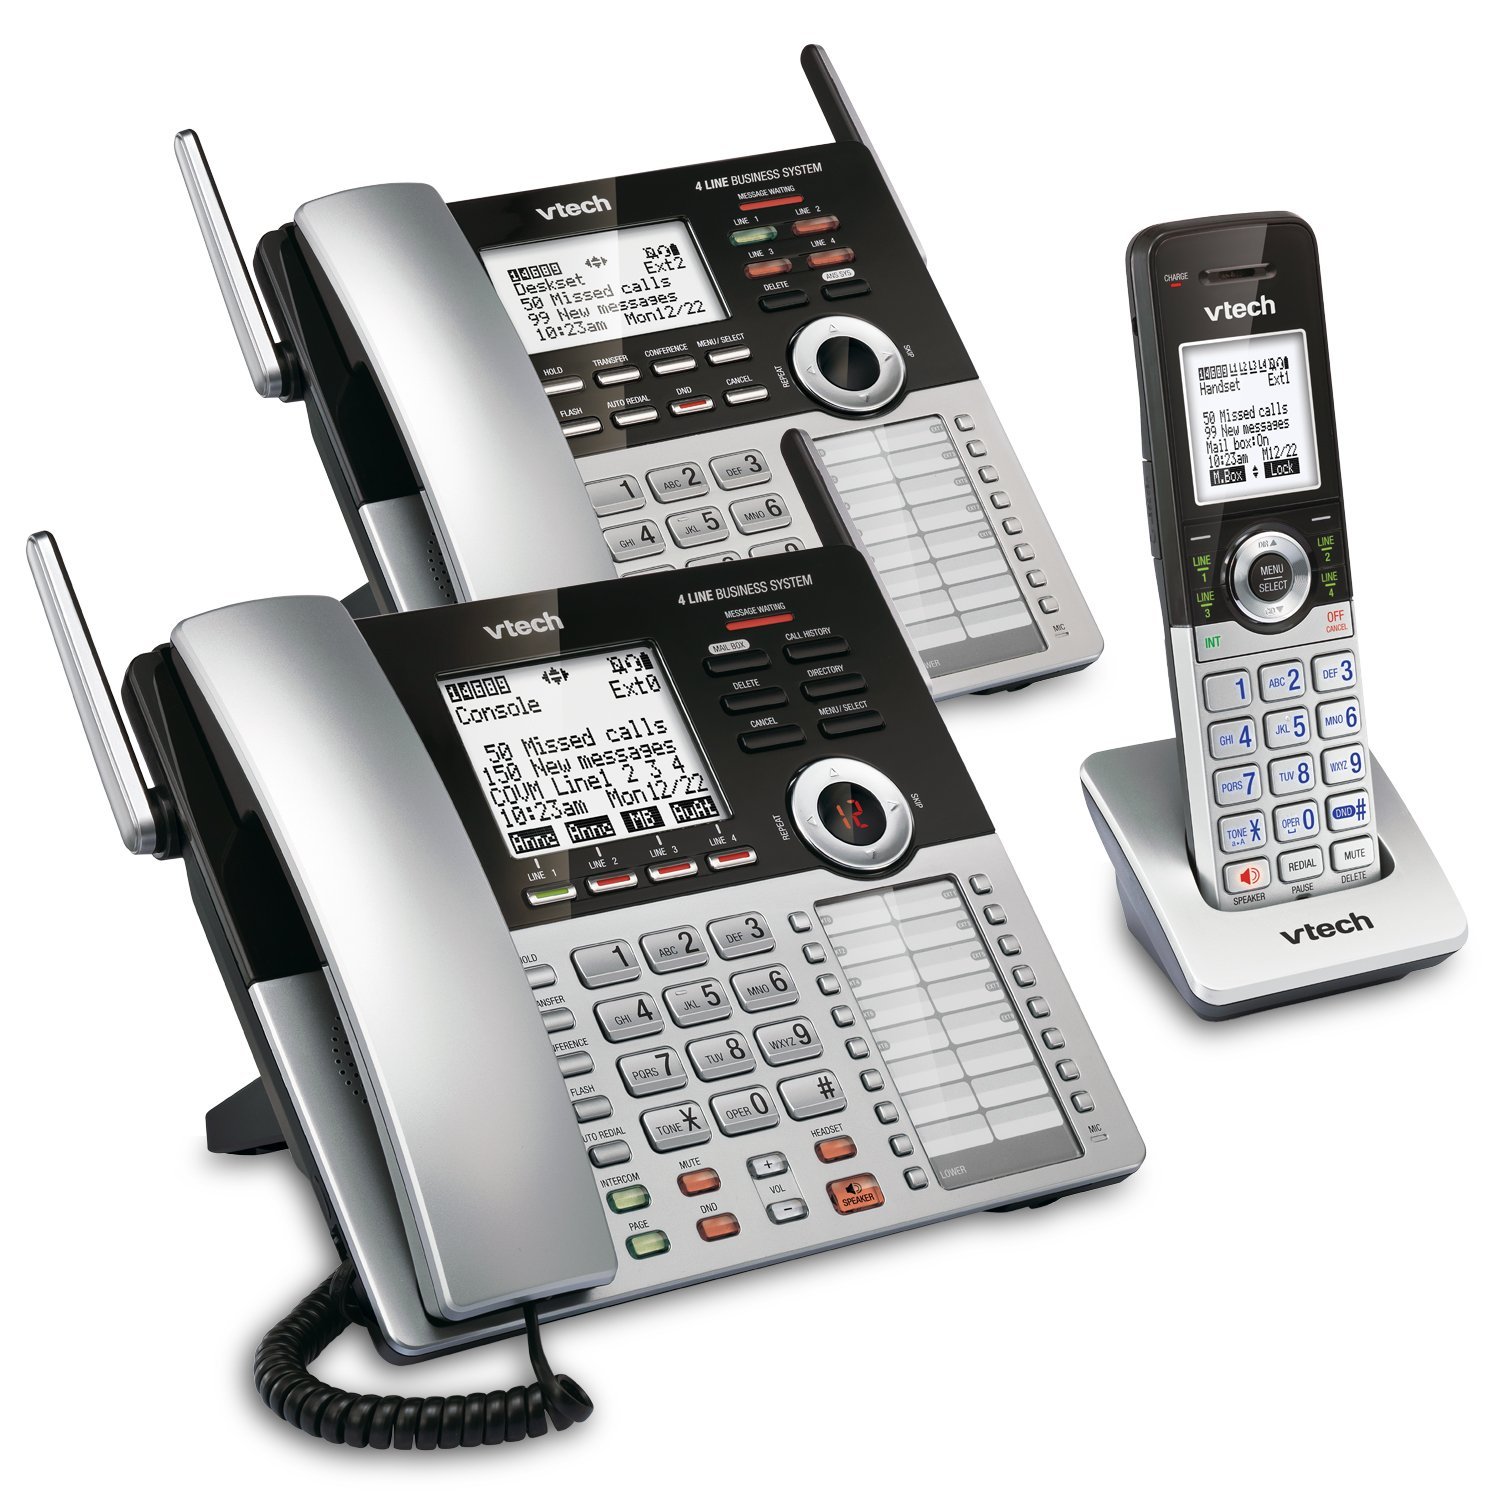 Amazon.com: VTech 4-Line Small Business Phone System - Office ...